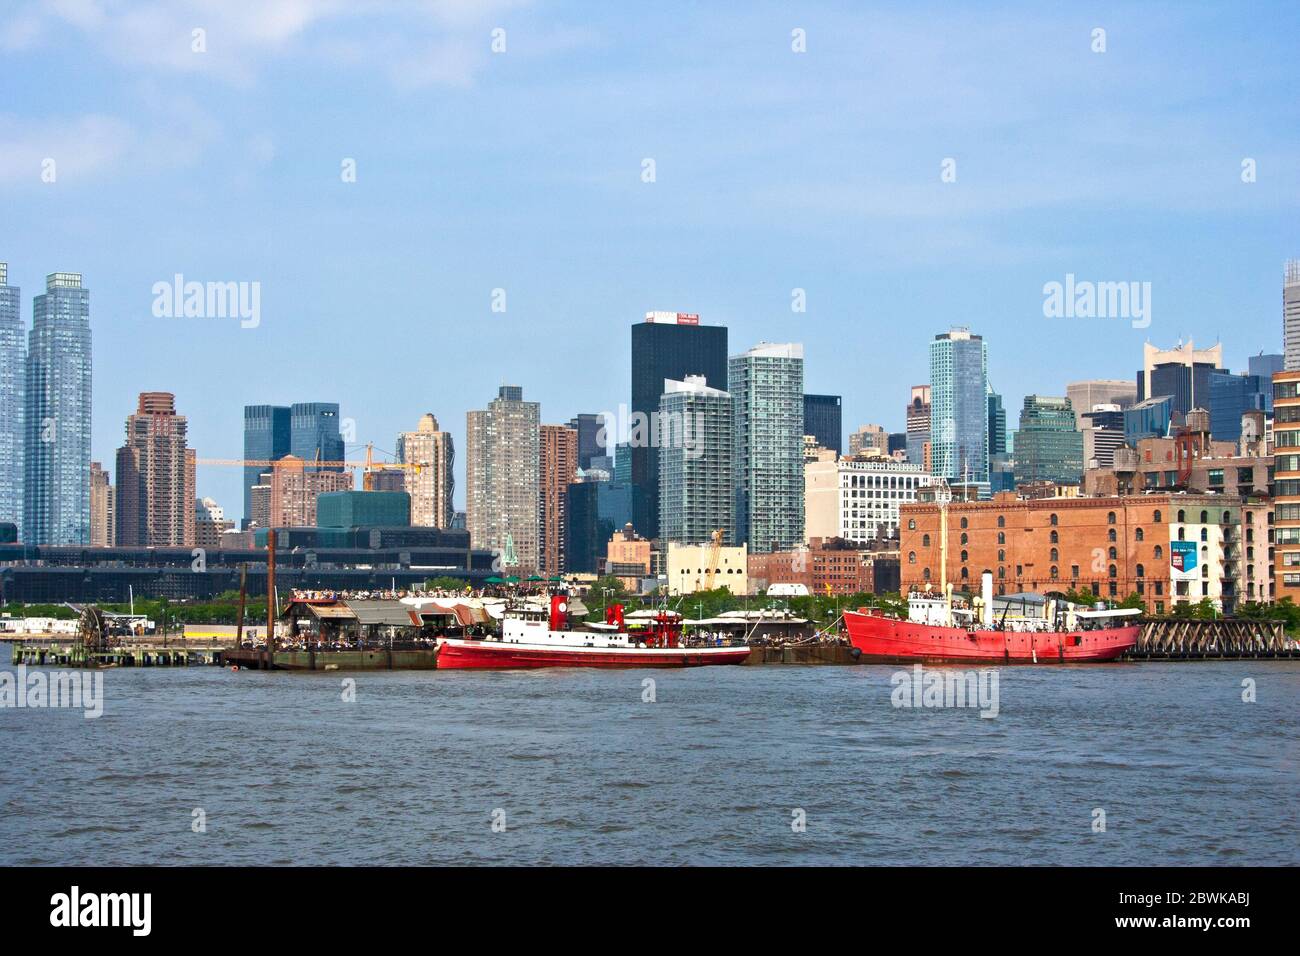 the view from the boat along the Hudson river. You can see buildings , ships and of course, the Liberty Statue. Stock Photo